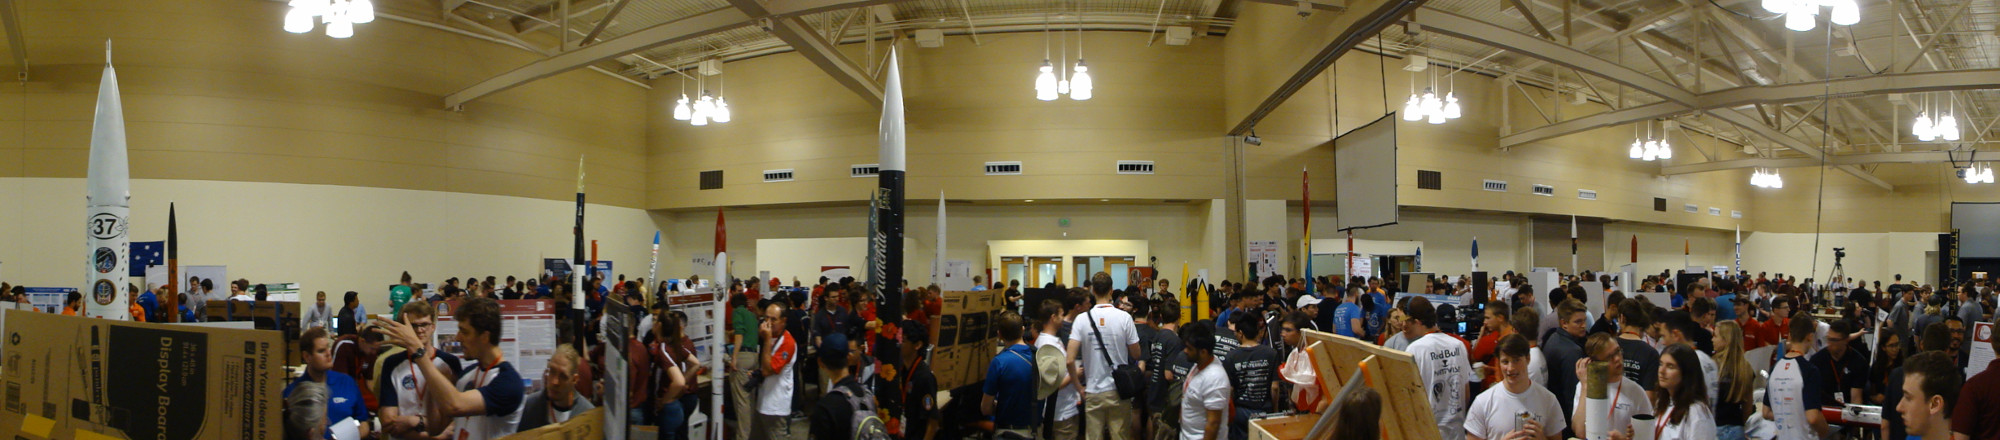 Panorama picture of the exhibition hall of the Spaceport America Cup.